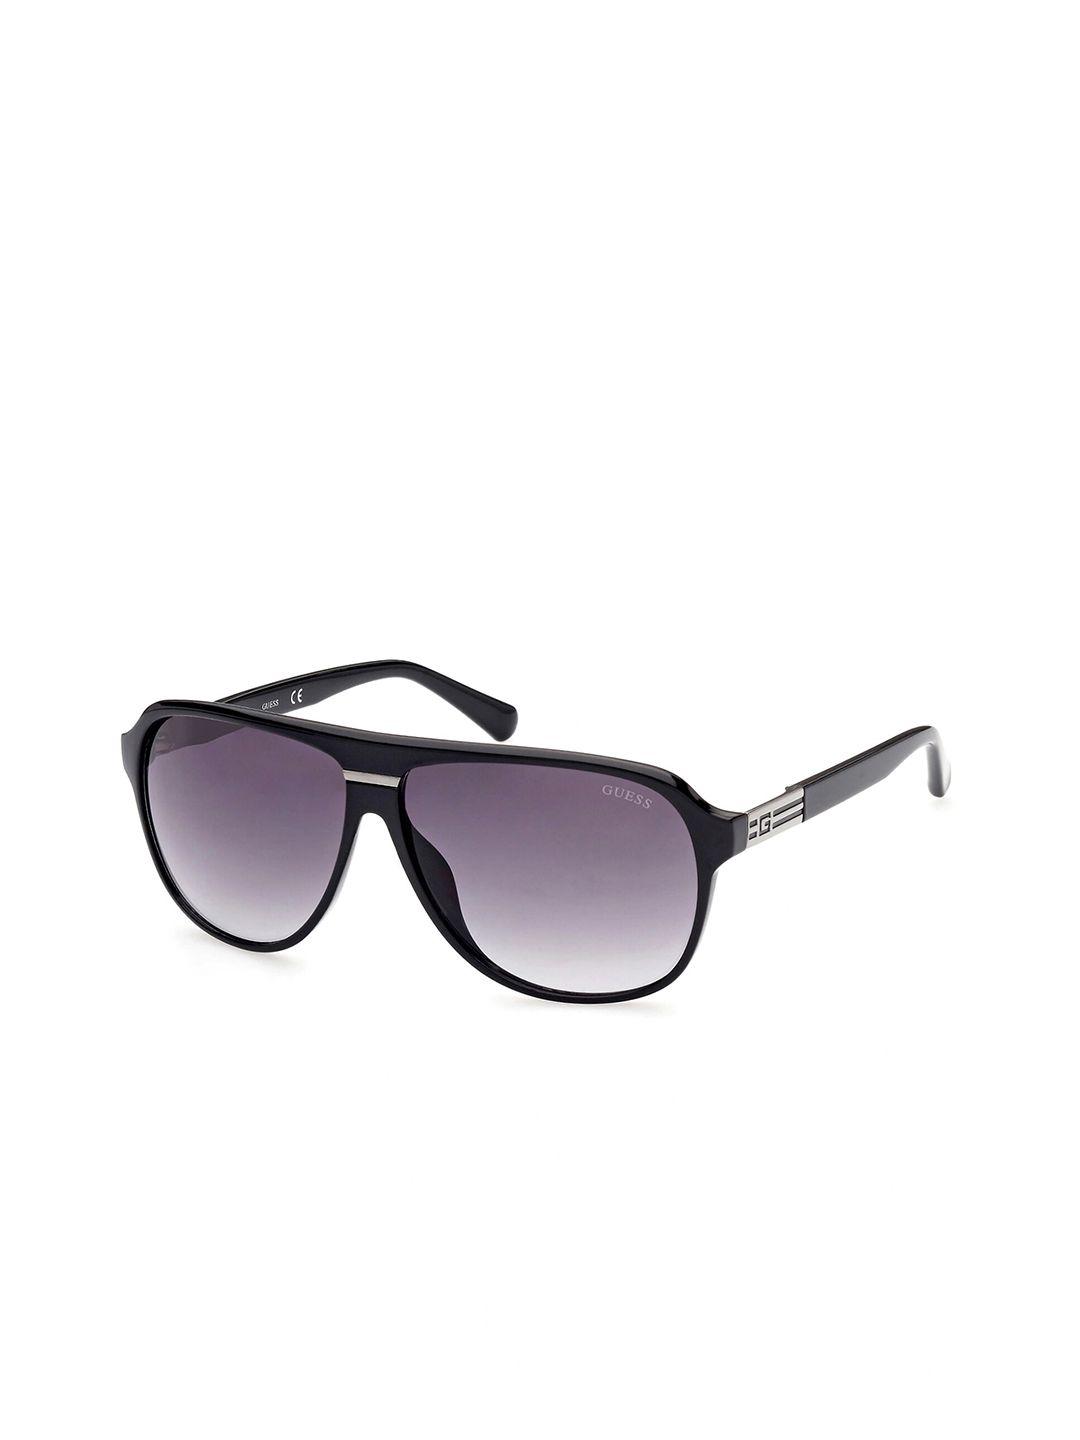 guess-aviator-sunglasses-with-uv-protected-lens